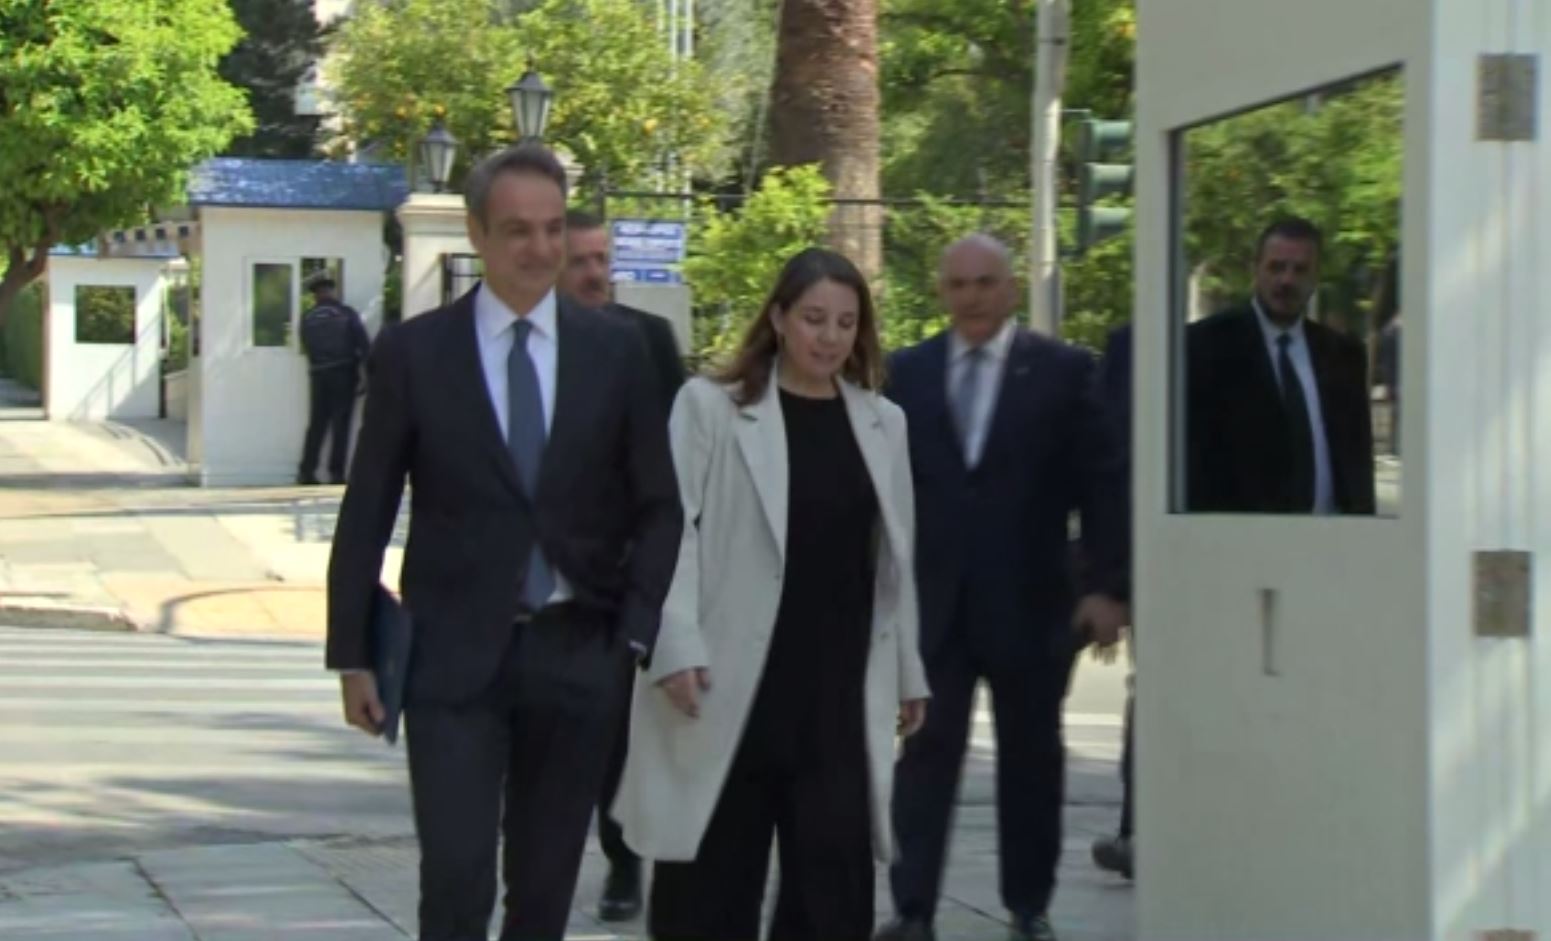 Mitsotakis to Bloomberg: We aim to repay certain bailout loans ahead of schedule